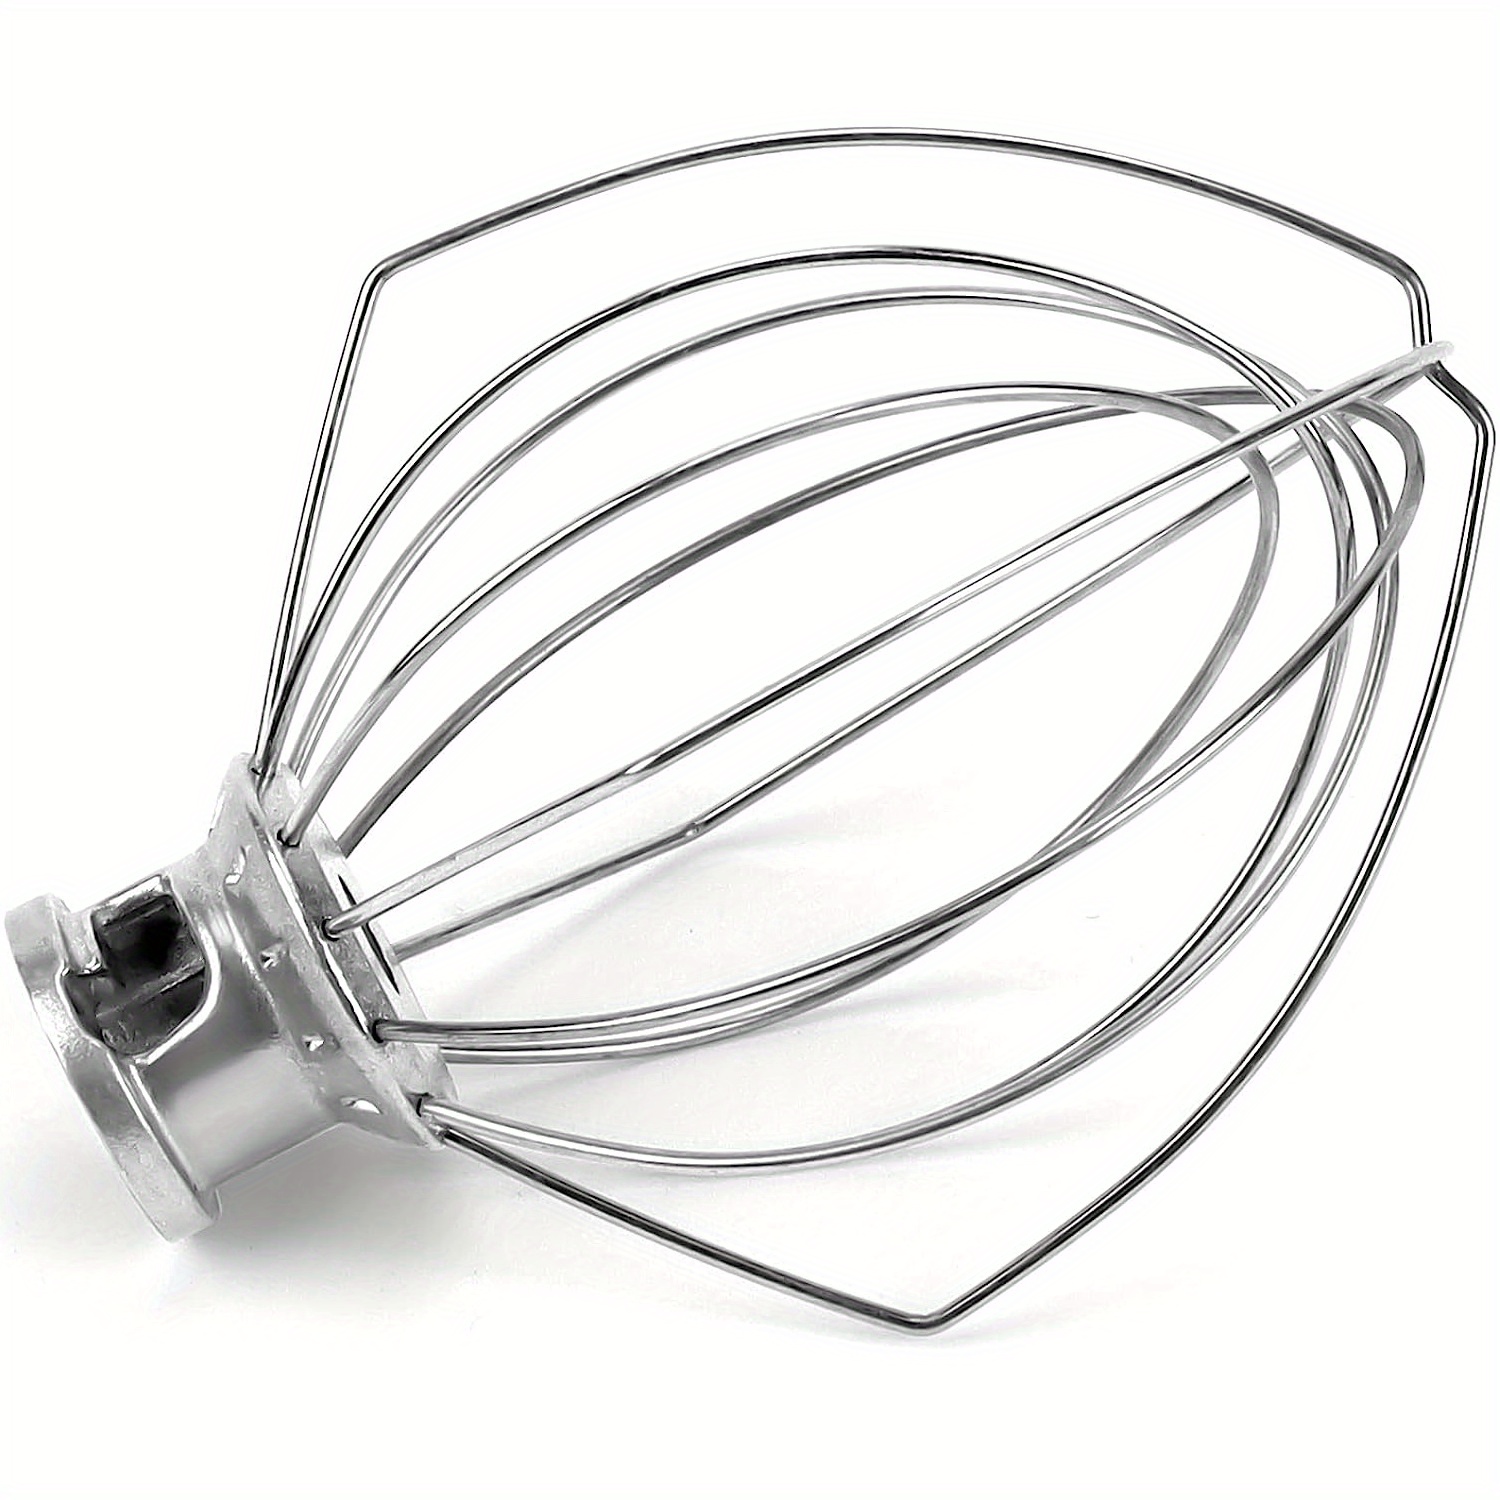 Spring Coil Whisk Wire Whisk Stainless Steel Egg Beater Hand Mixer Heavy  Duty